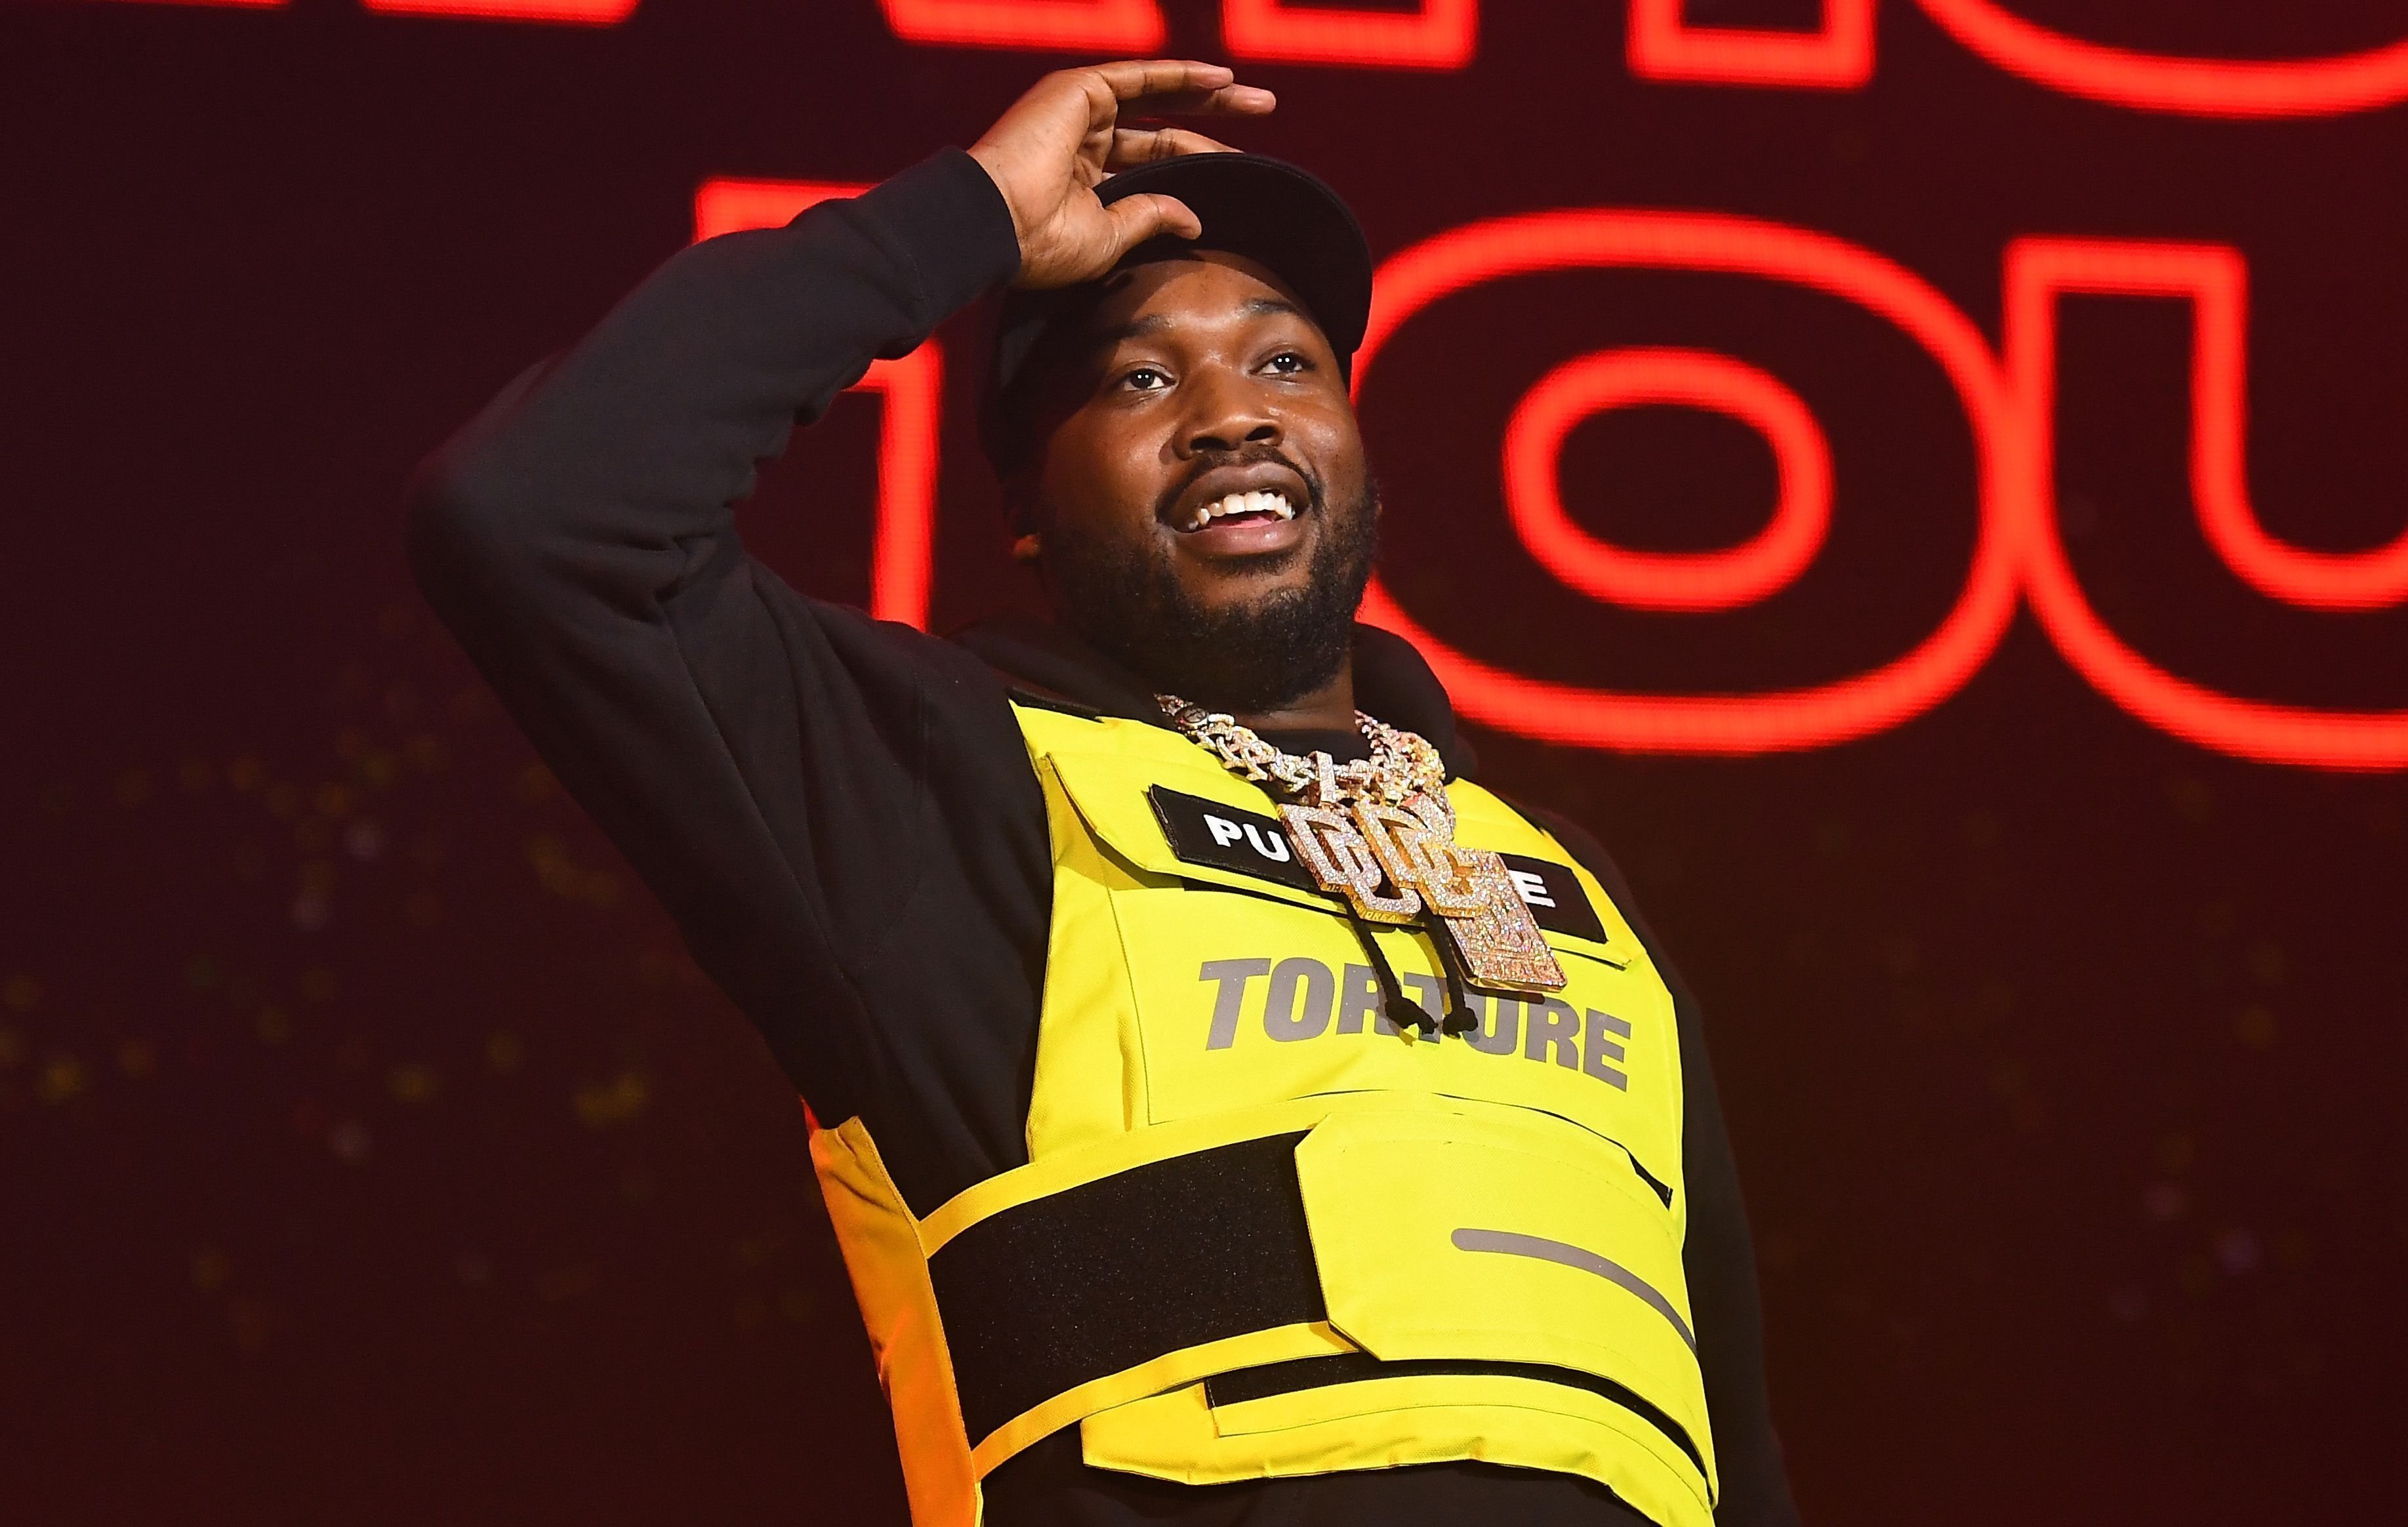 Meek Mill performs in Atlanta, Georgia in March 2019 - The Motivation Tour/ Source: Getty Images